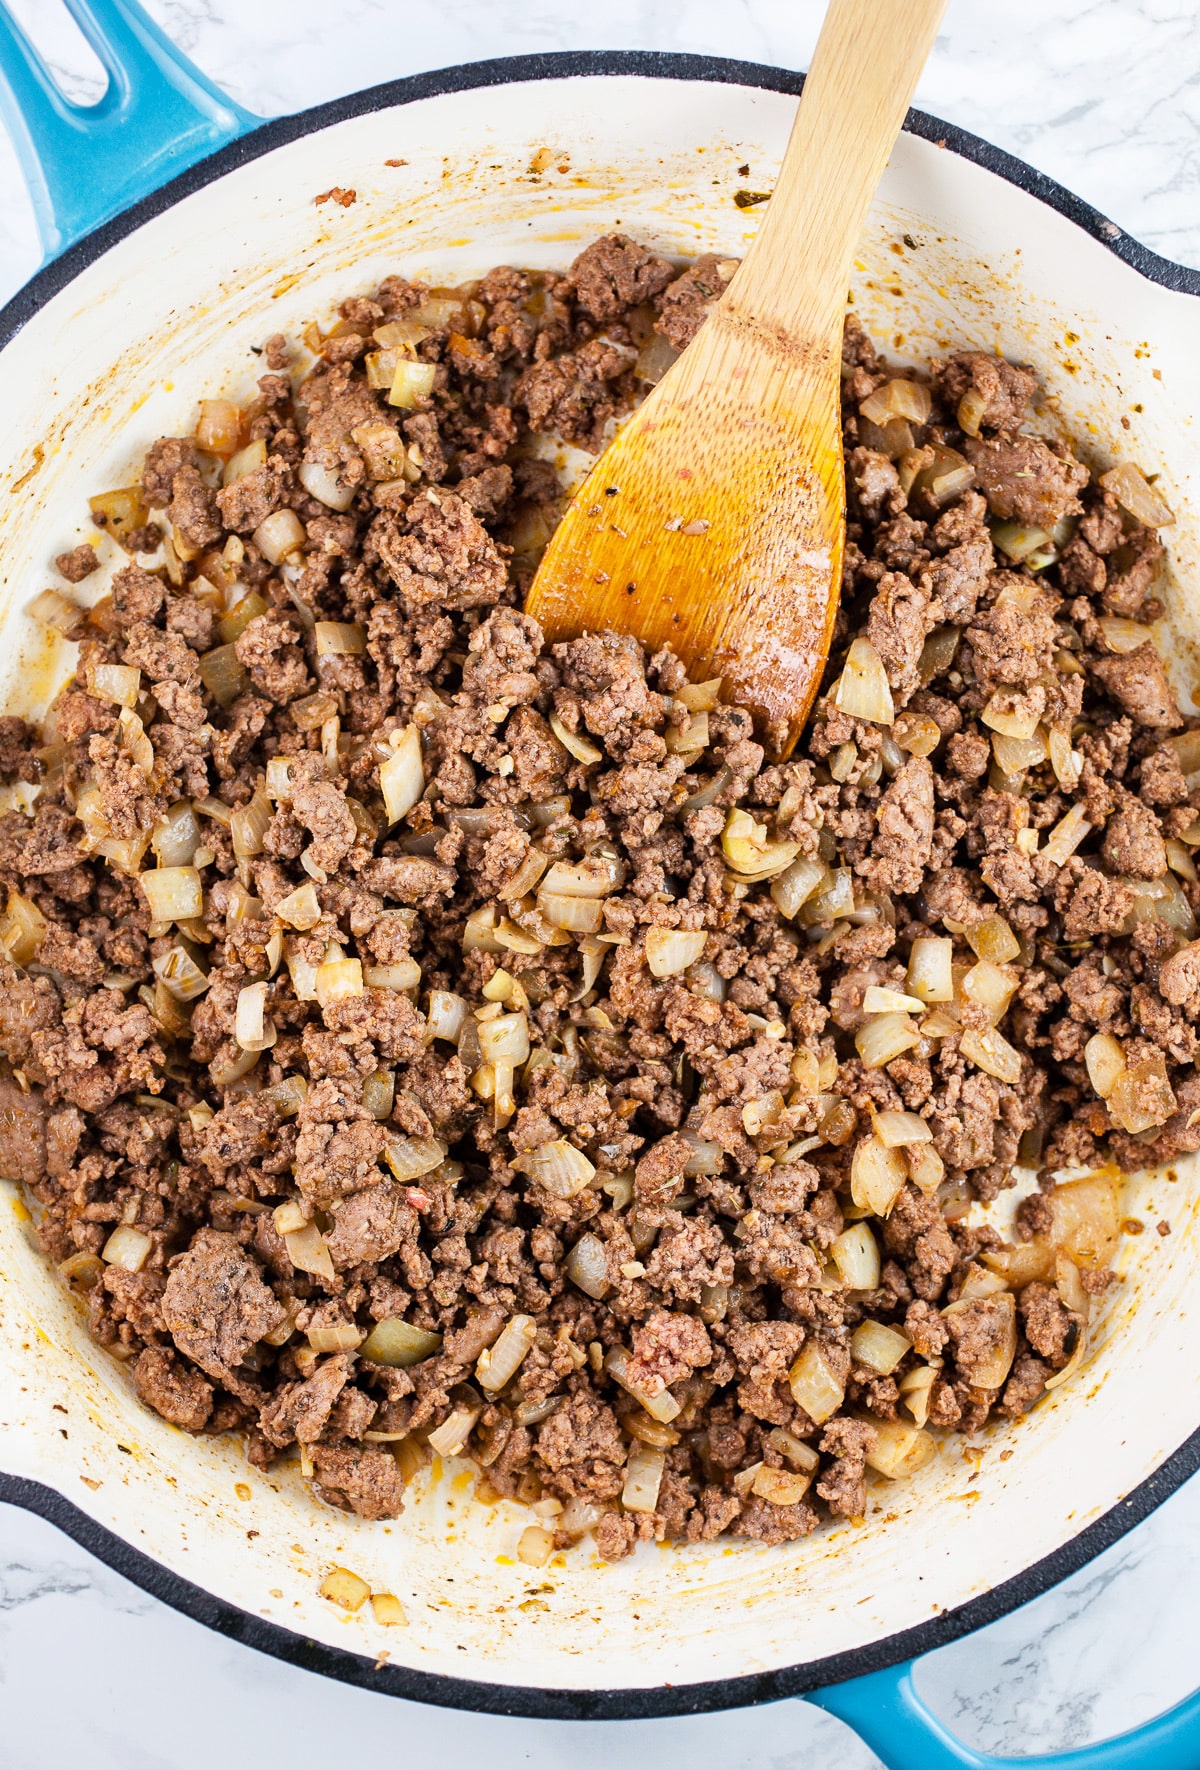 Ground beef sautéed in skillet with wooden spoon.